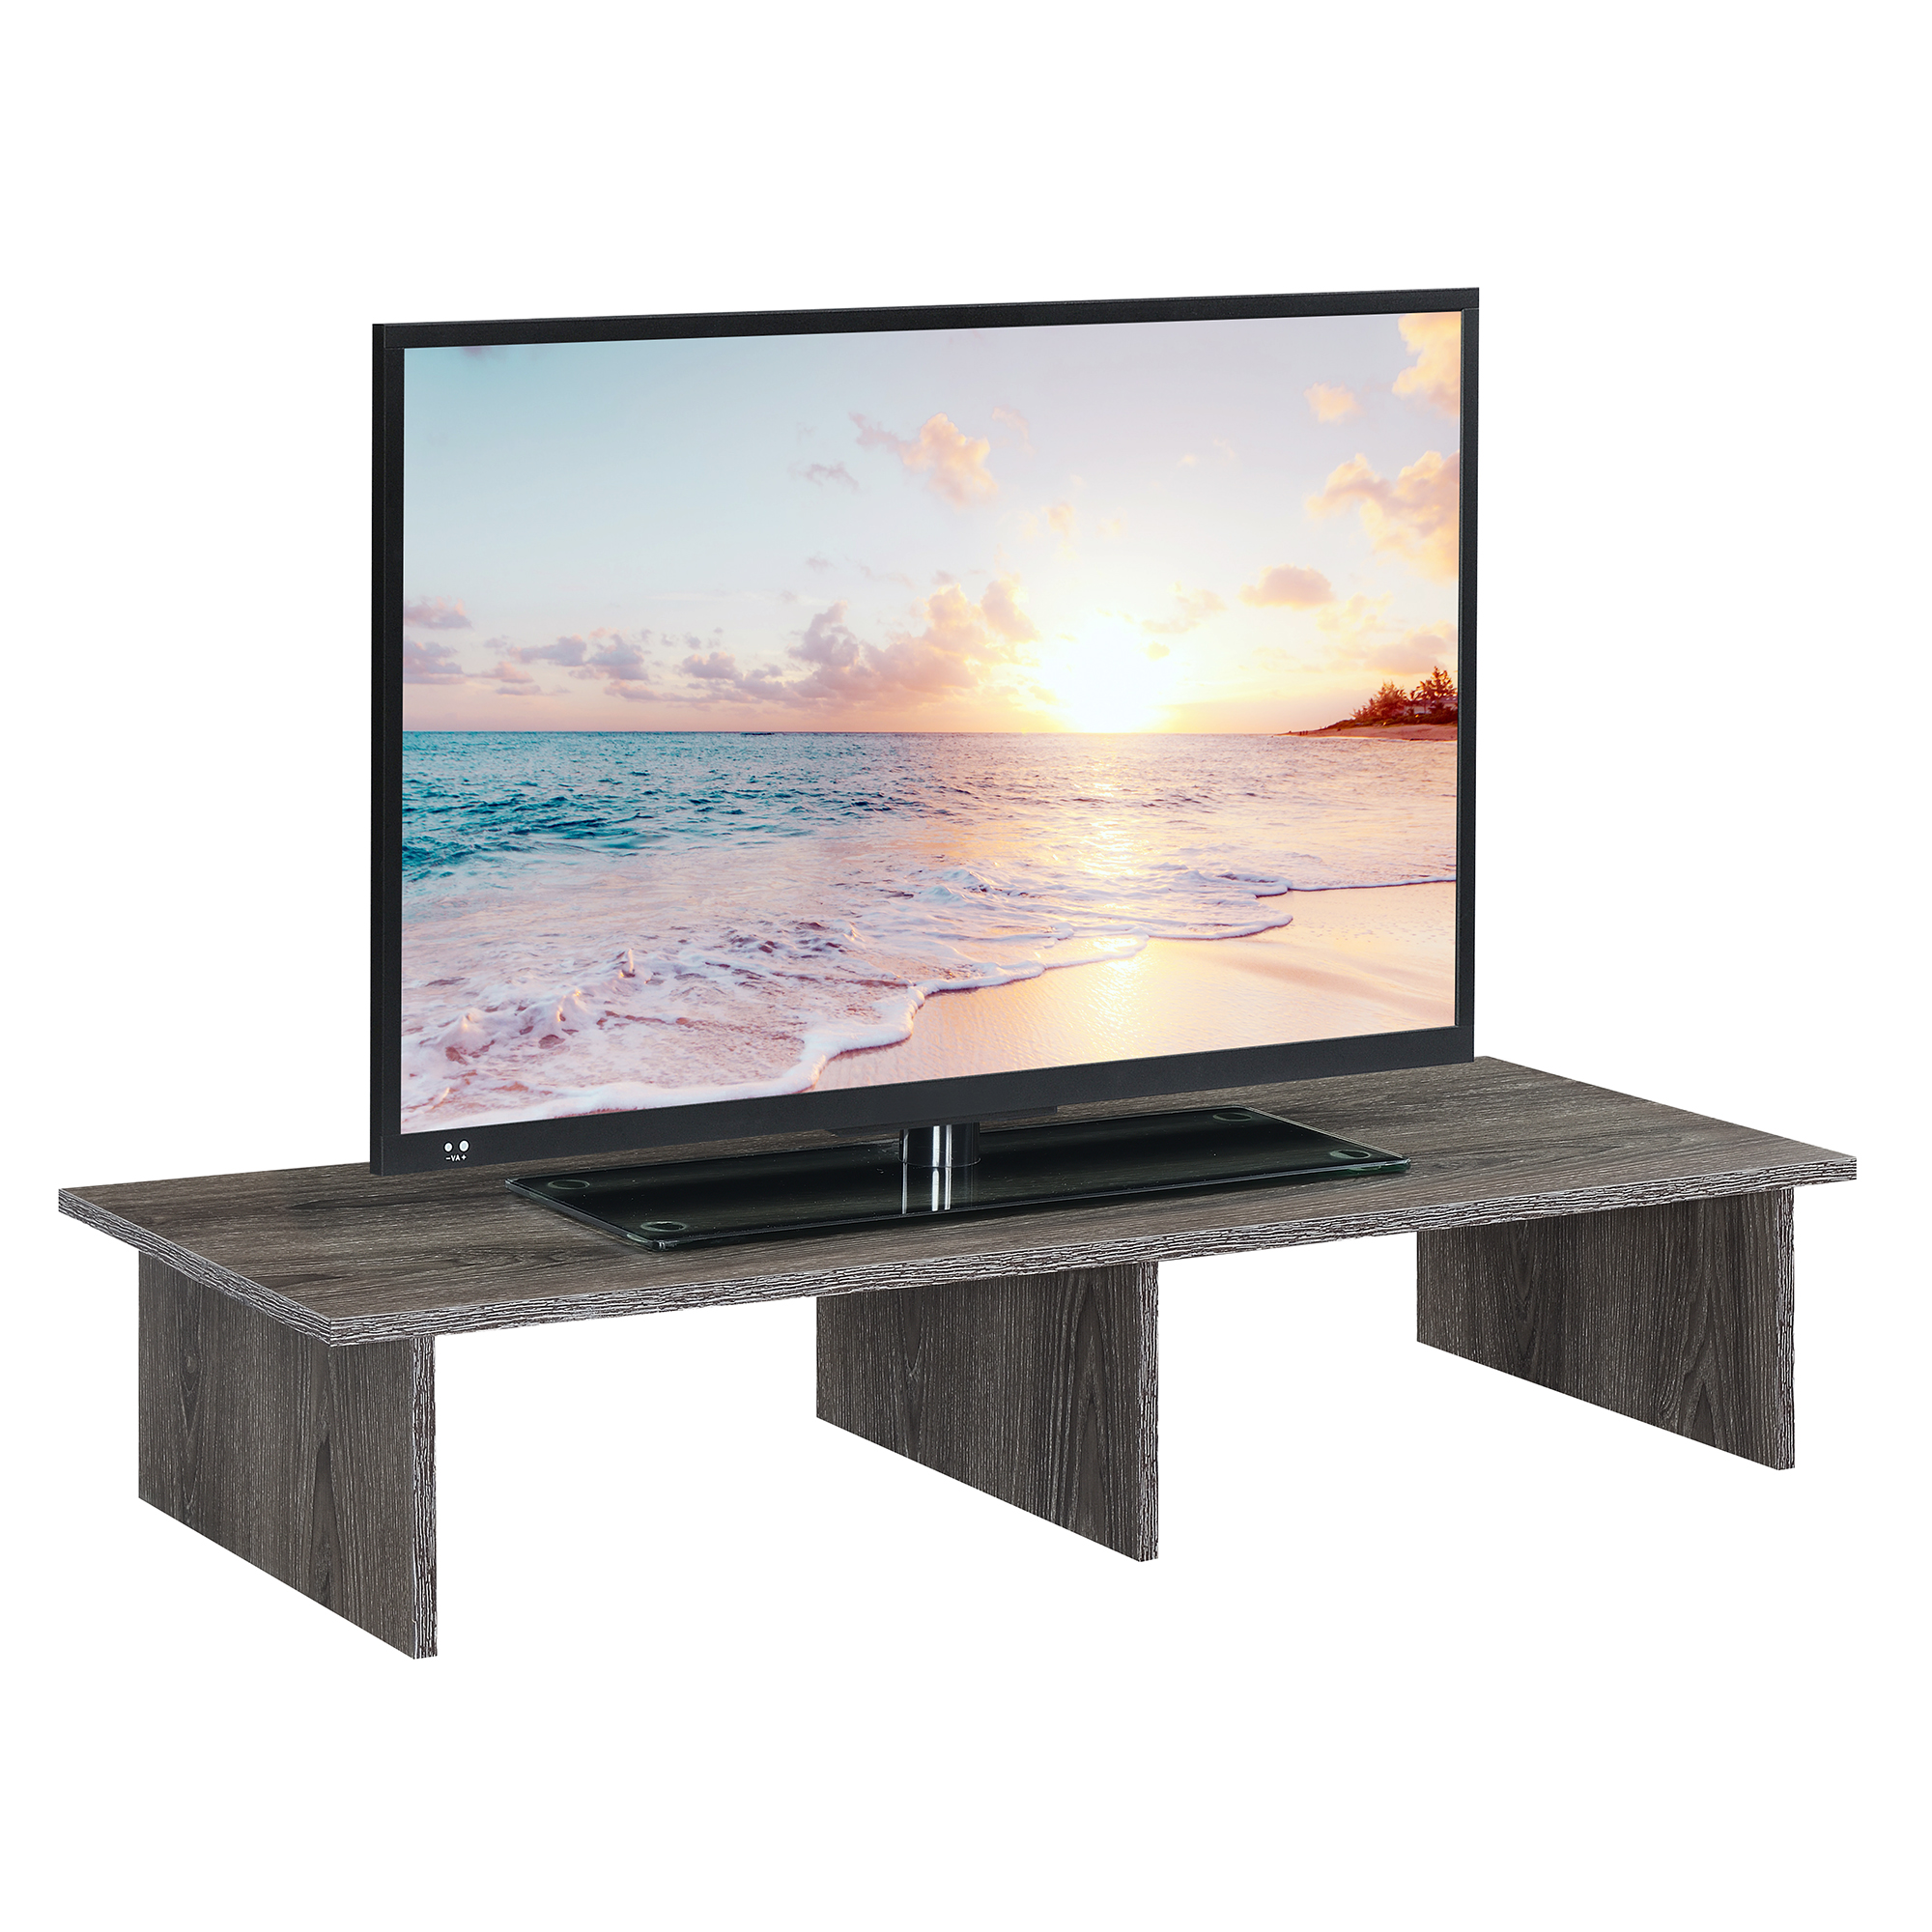 Convenience Concepts Designs2Go TV/Monitor Riser for TVs up to 46 inches, Weathered Gray - image 3 of 6